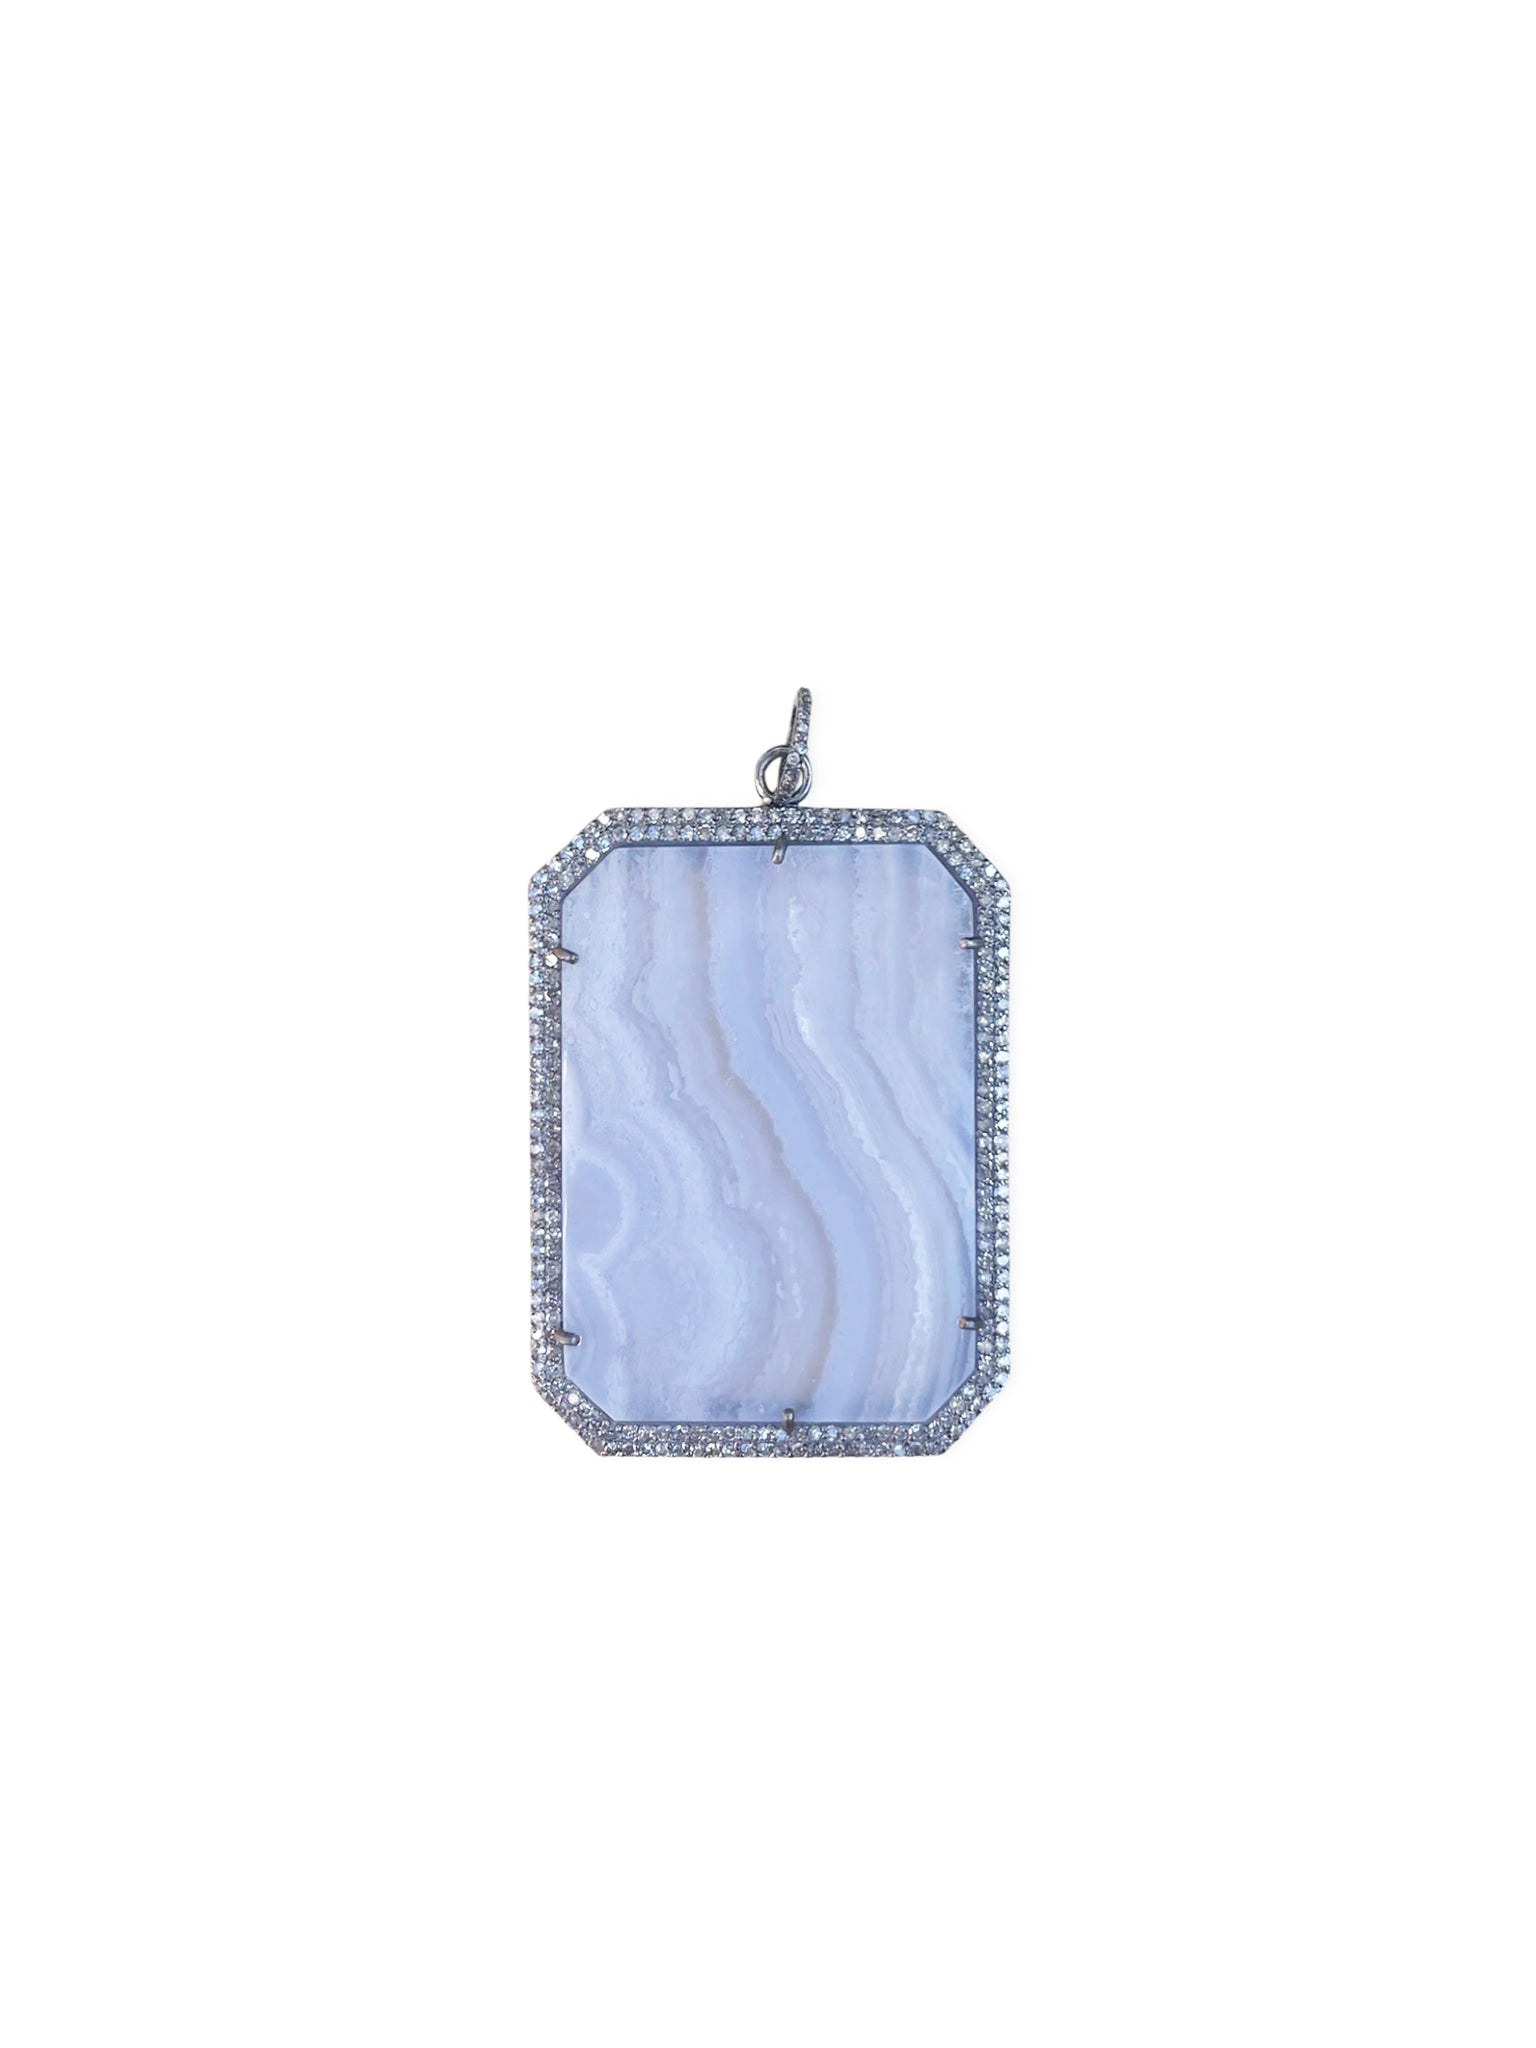 Crazy Lace Agate set in Sterling Silver with Pave Diamonds